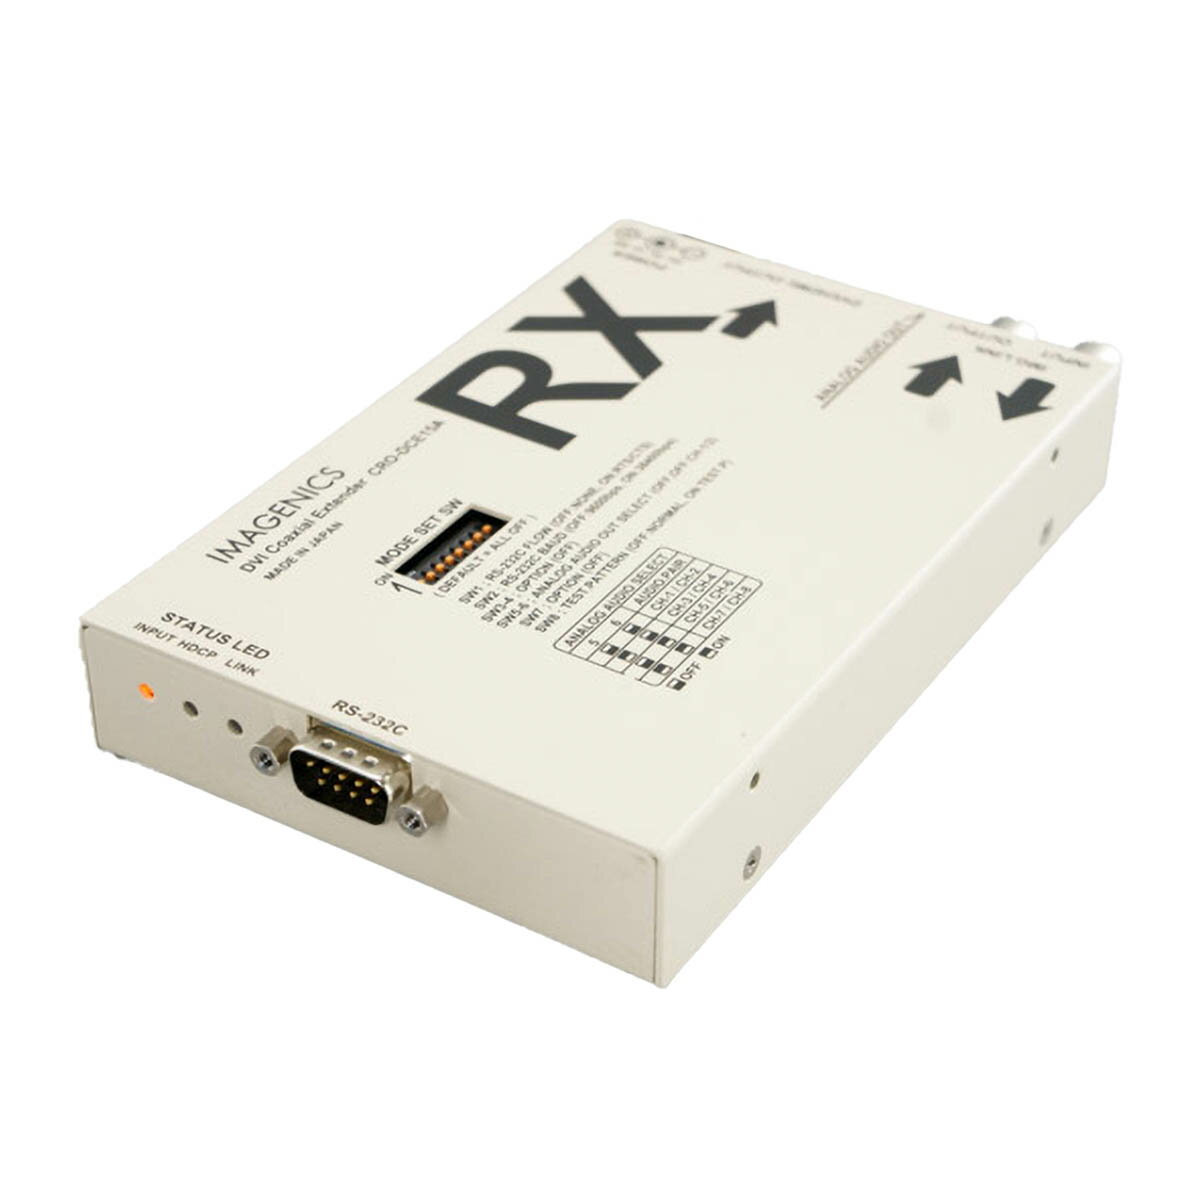   [PG]USED 8ۏ c217   IMAGENICS CRO-DCE15A RX DVI Coaxial Extender DVIRALVGNXe_[[SK01212-0295]